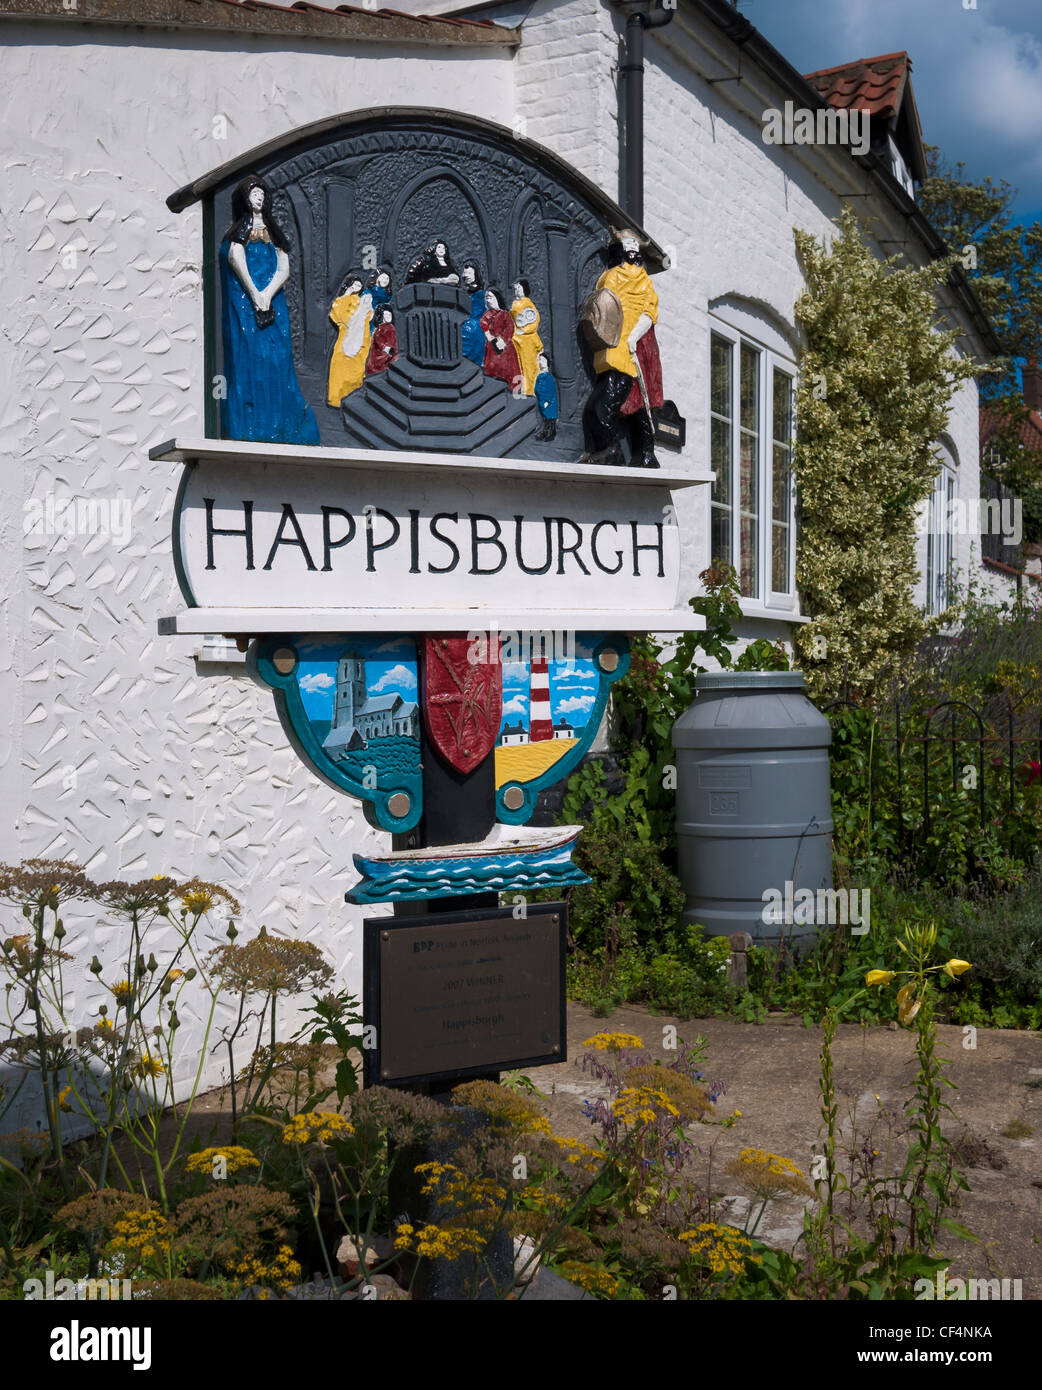 The Happisburgh village sign, depicting figures and landmarks from the villages past. Stock Photo